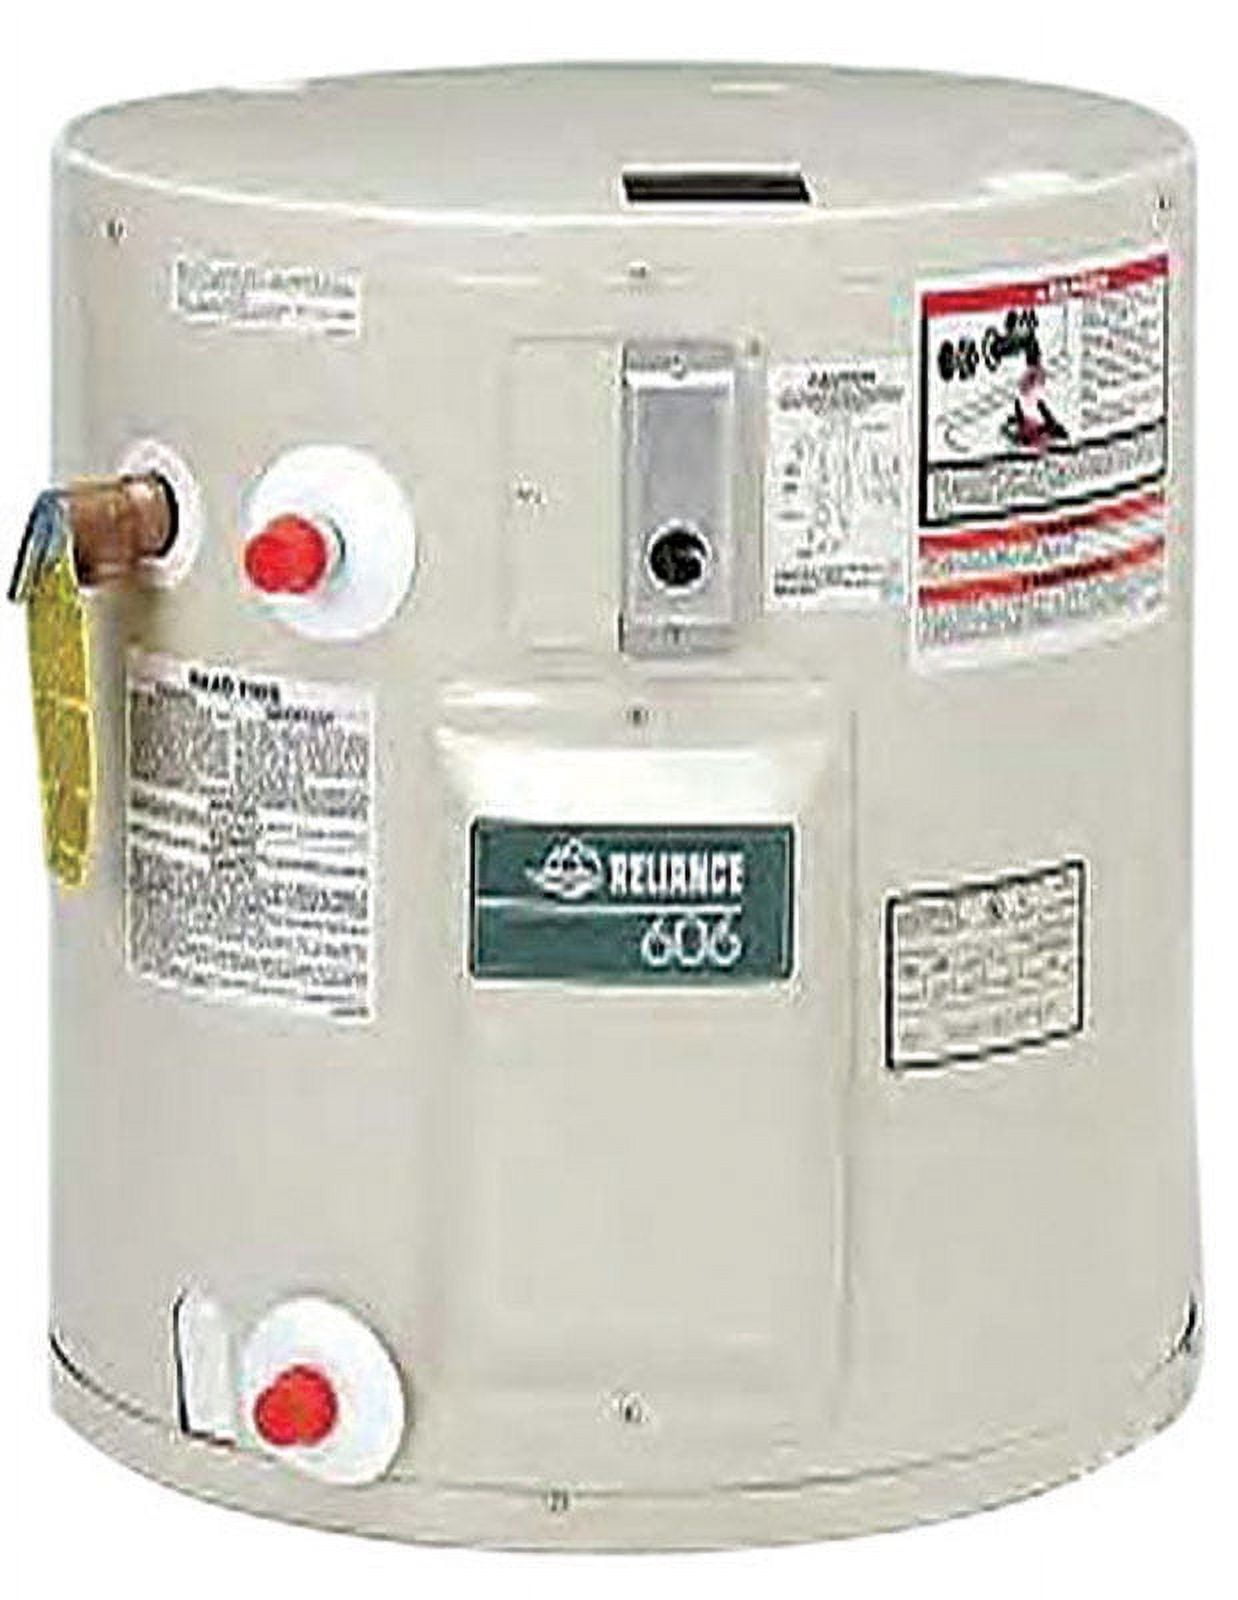 19-Gallon Point-of-Use Electric Water Heater